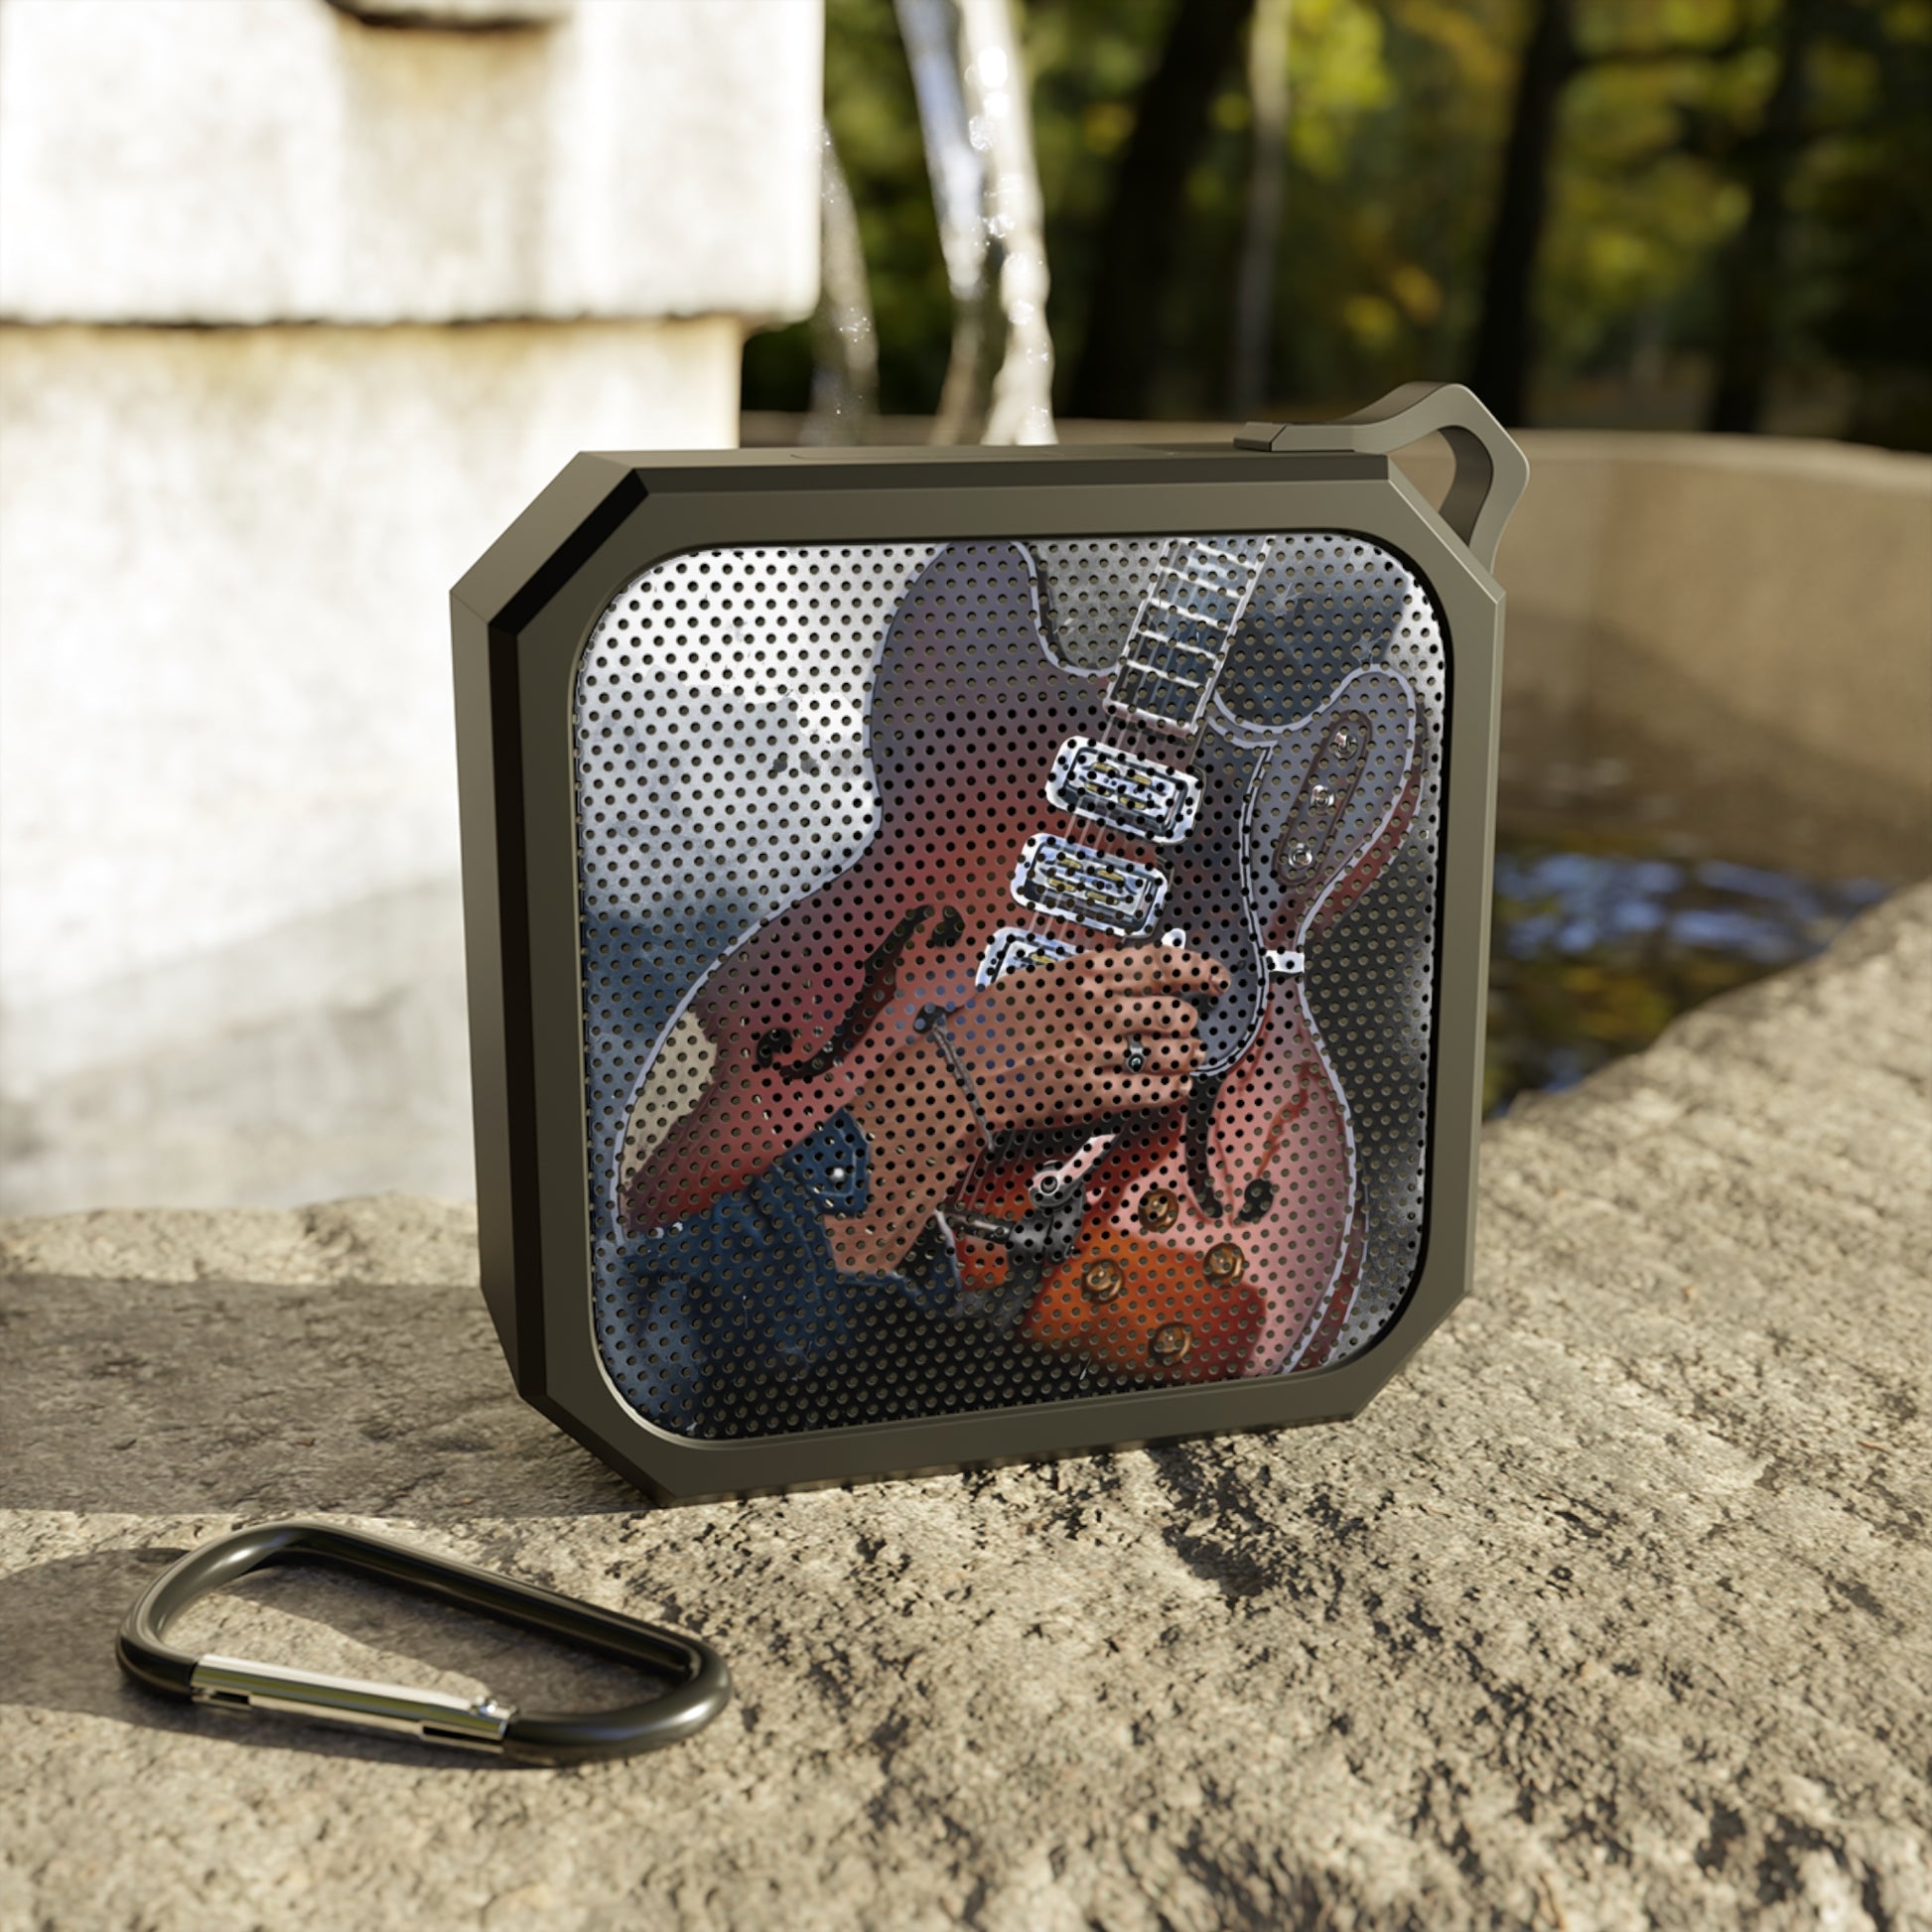 digital painting of a vintage electric guitar with hand printed on a bluetooth speaker